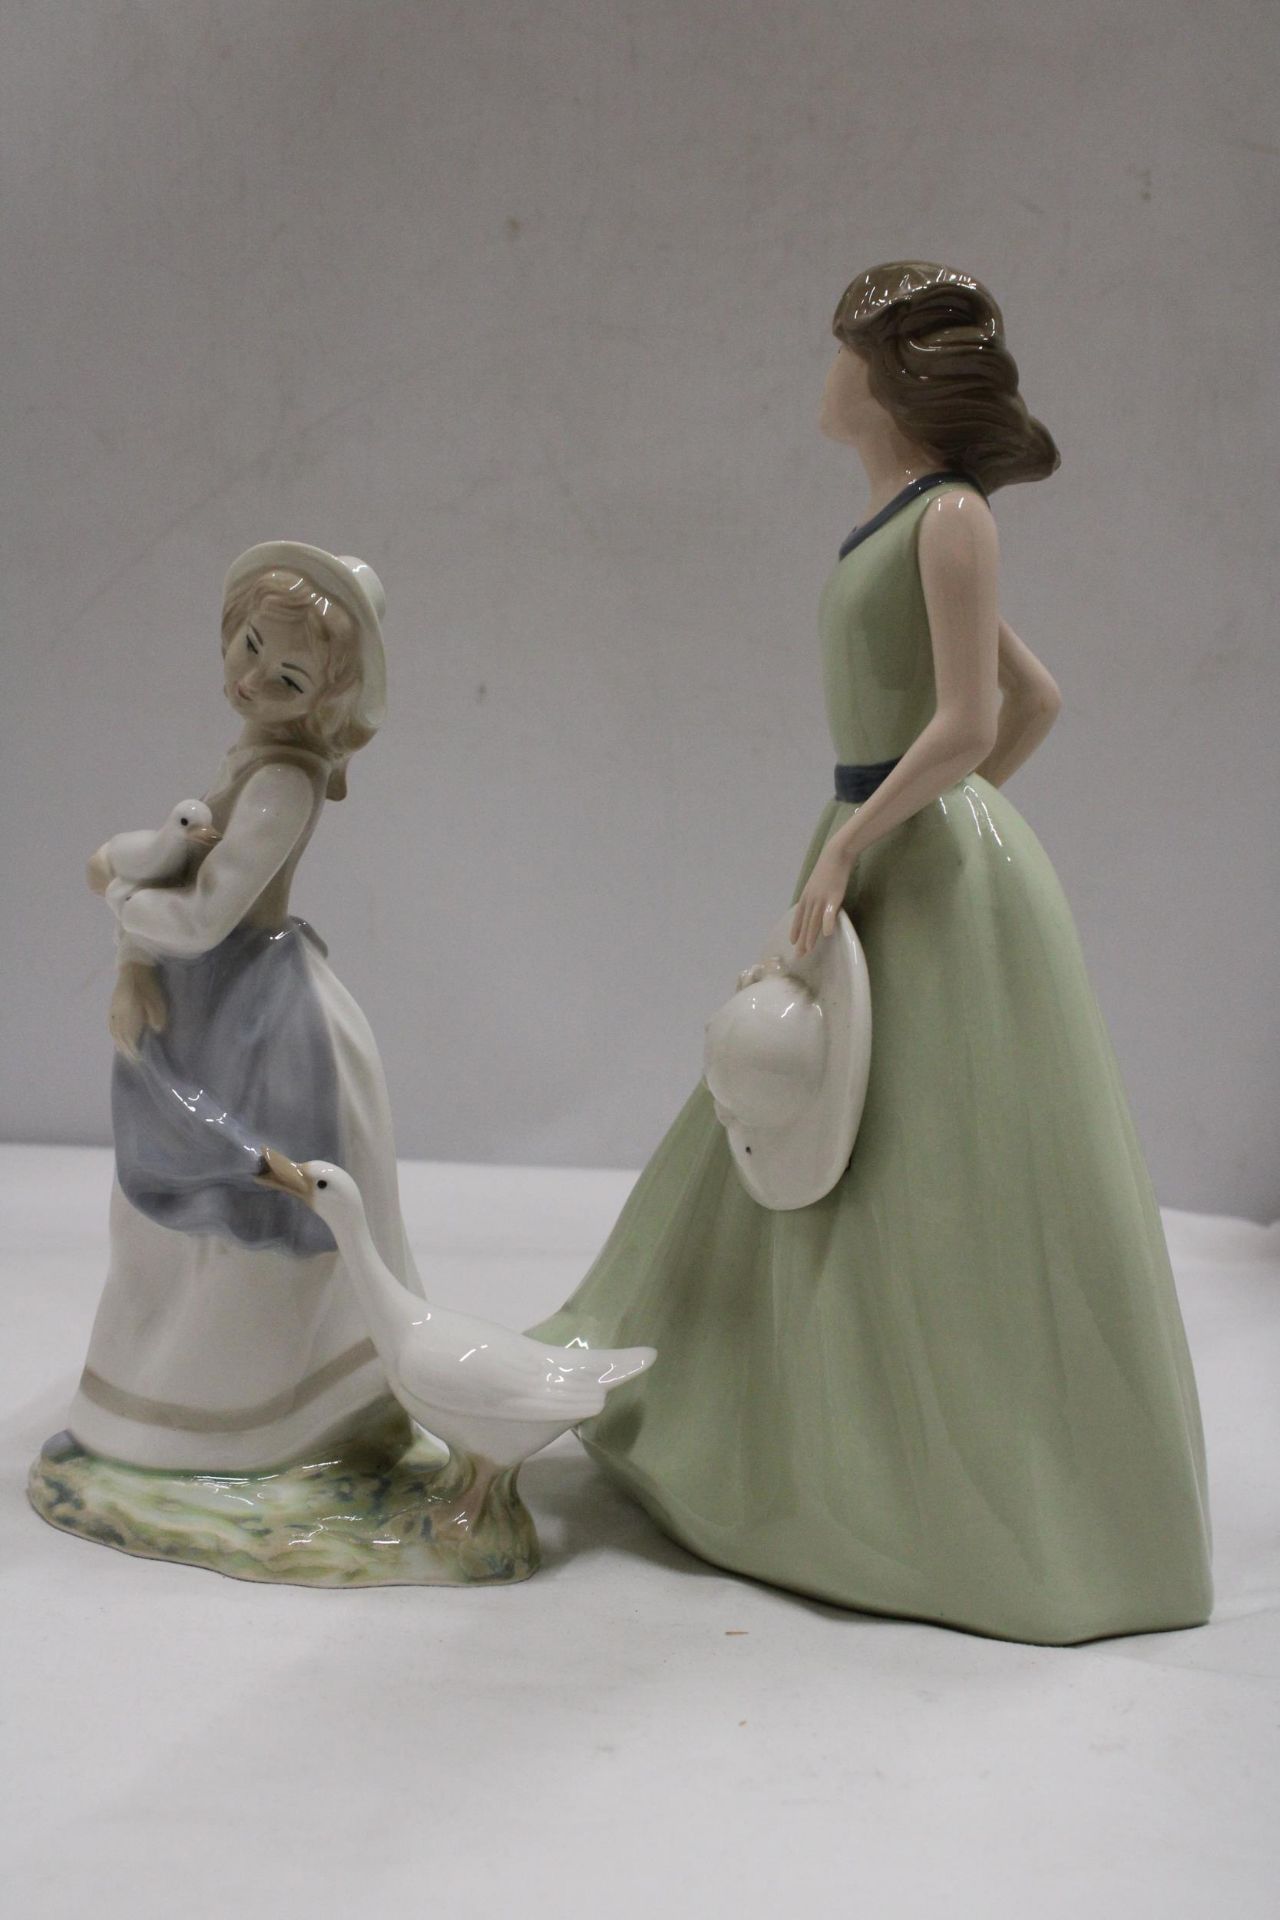 TWO SPANISH LADY FIGURES - TENGRA A GIRL WITH GEESE AND A NADEL FIGURE GIRL HOLDING A HAT - Image 3 of 6